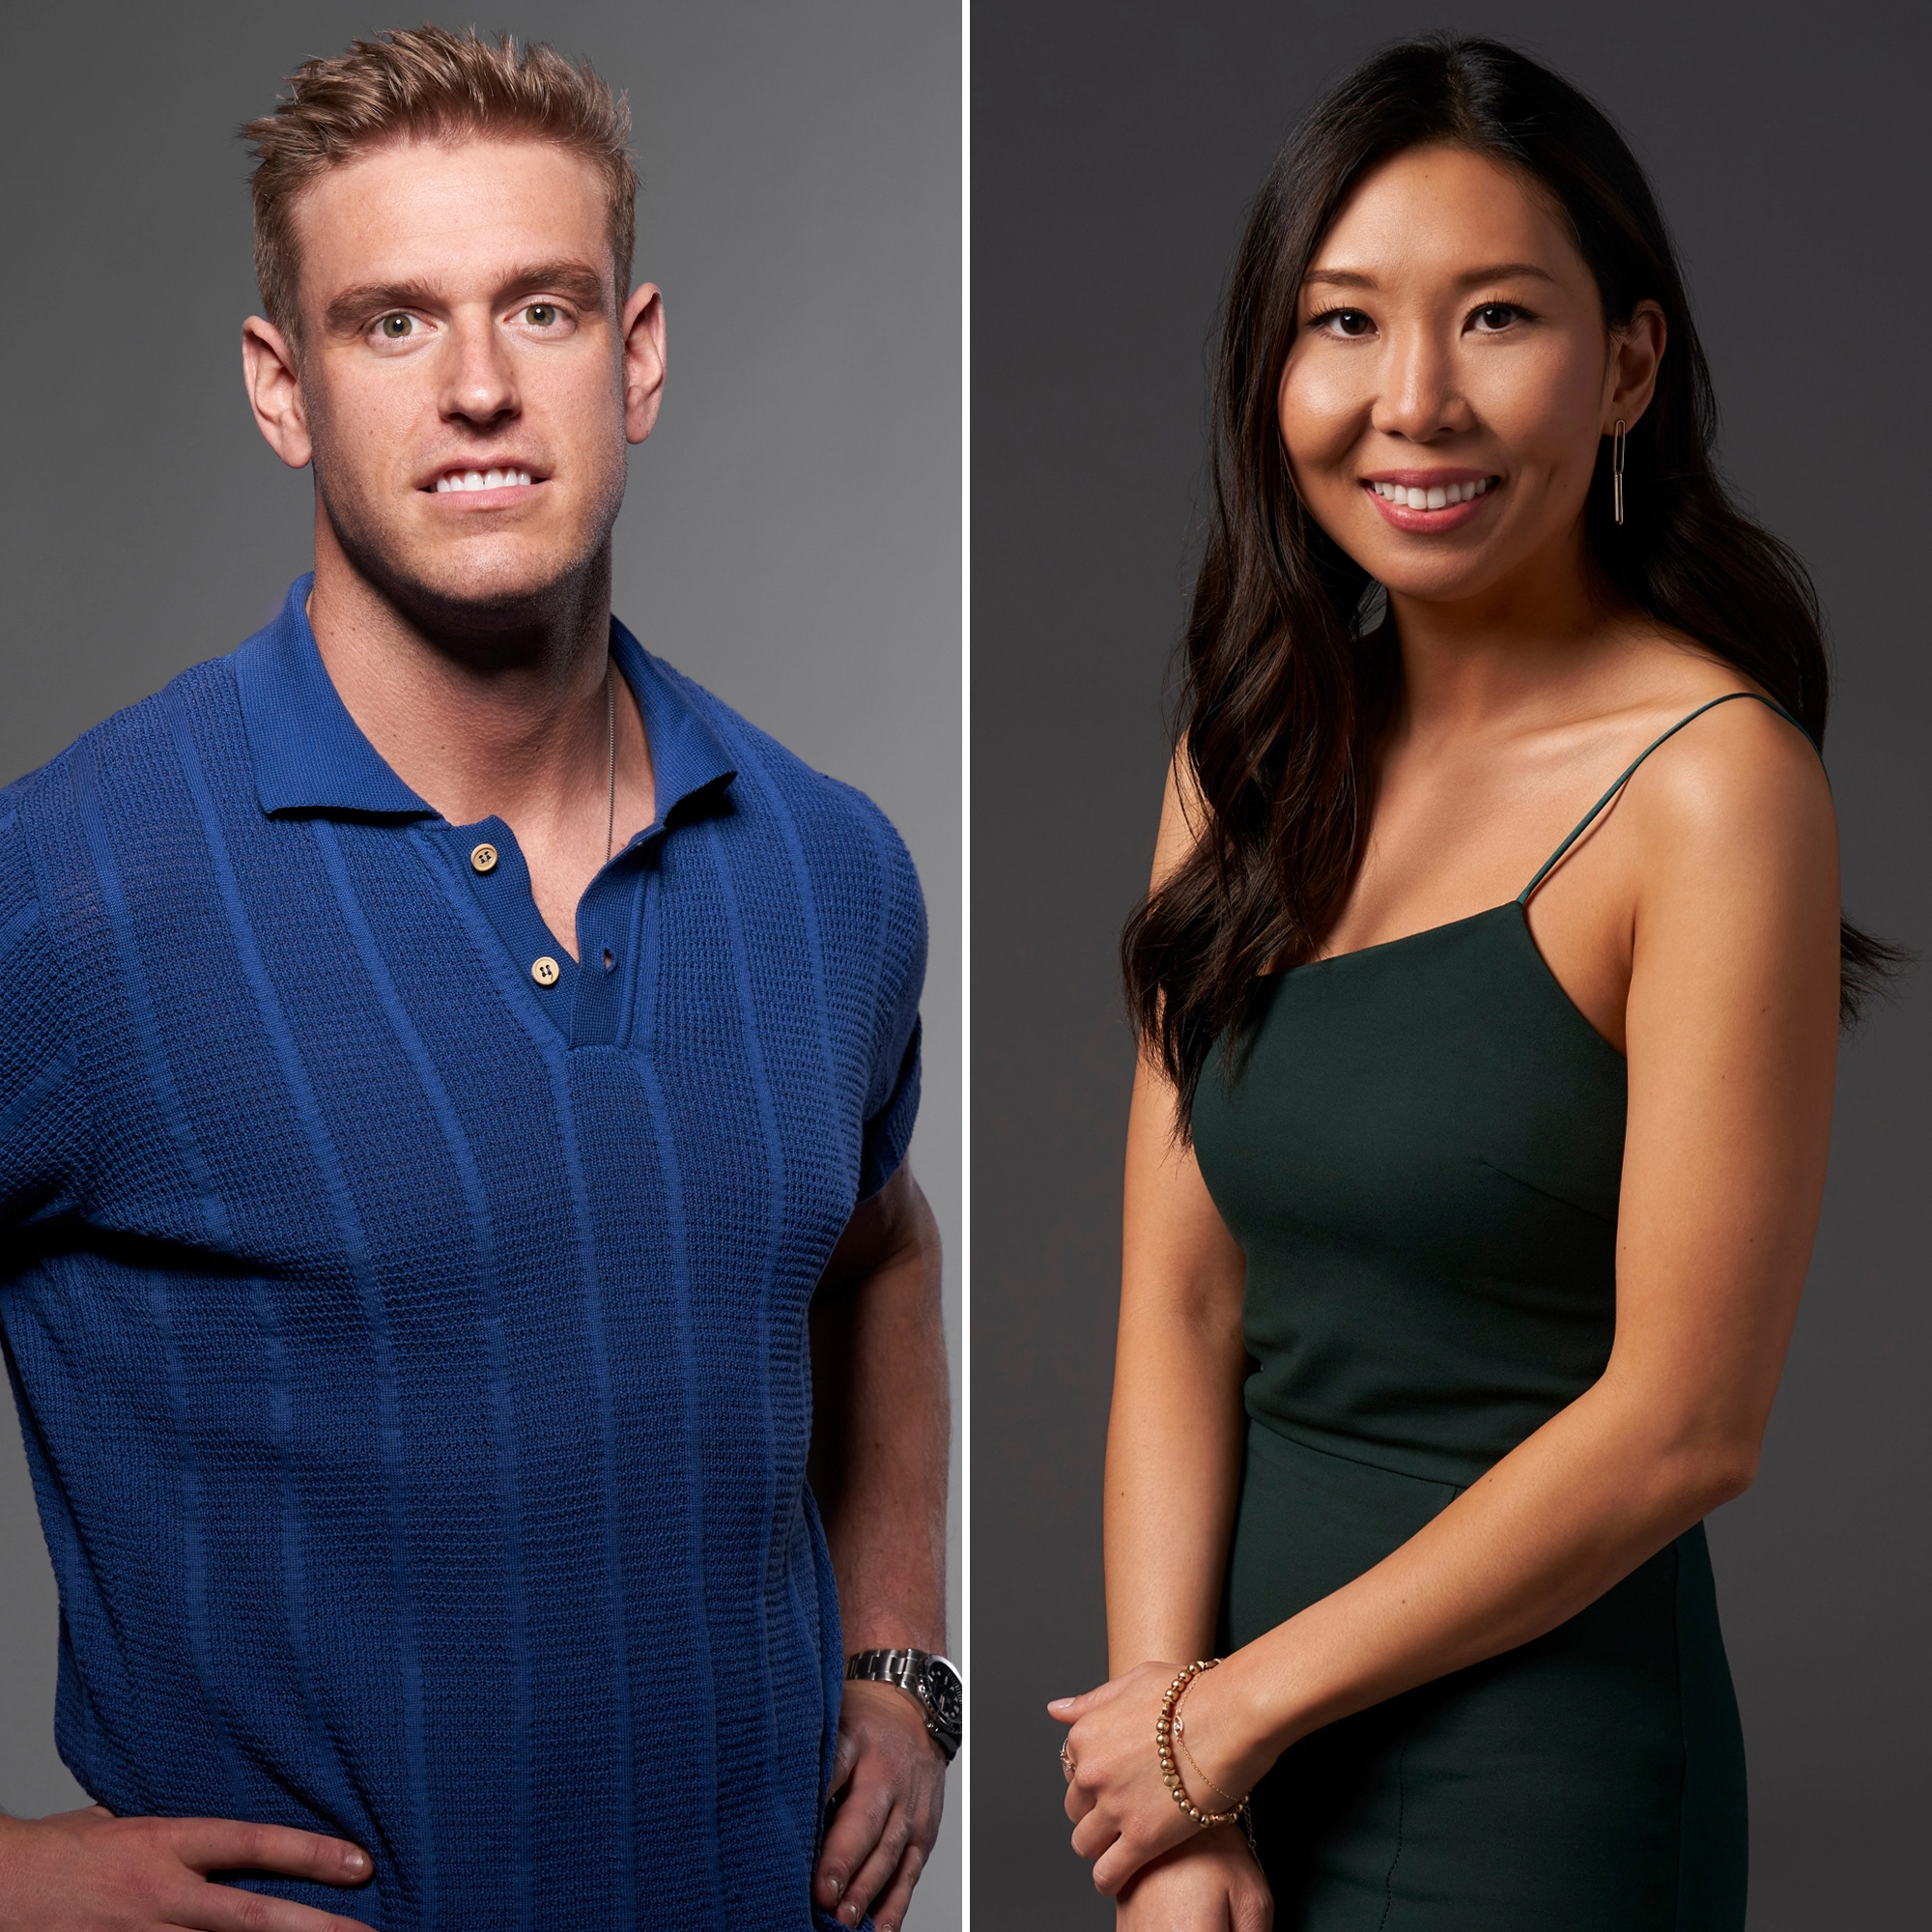 Love Is Blind's Natalie says Shayne joined Perfect Match when dating